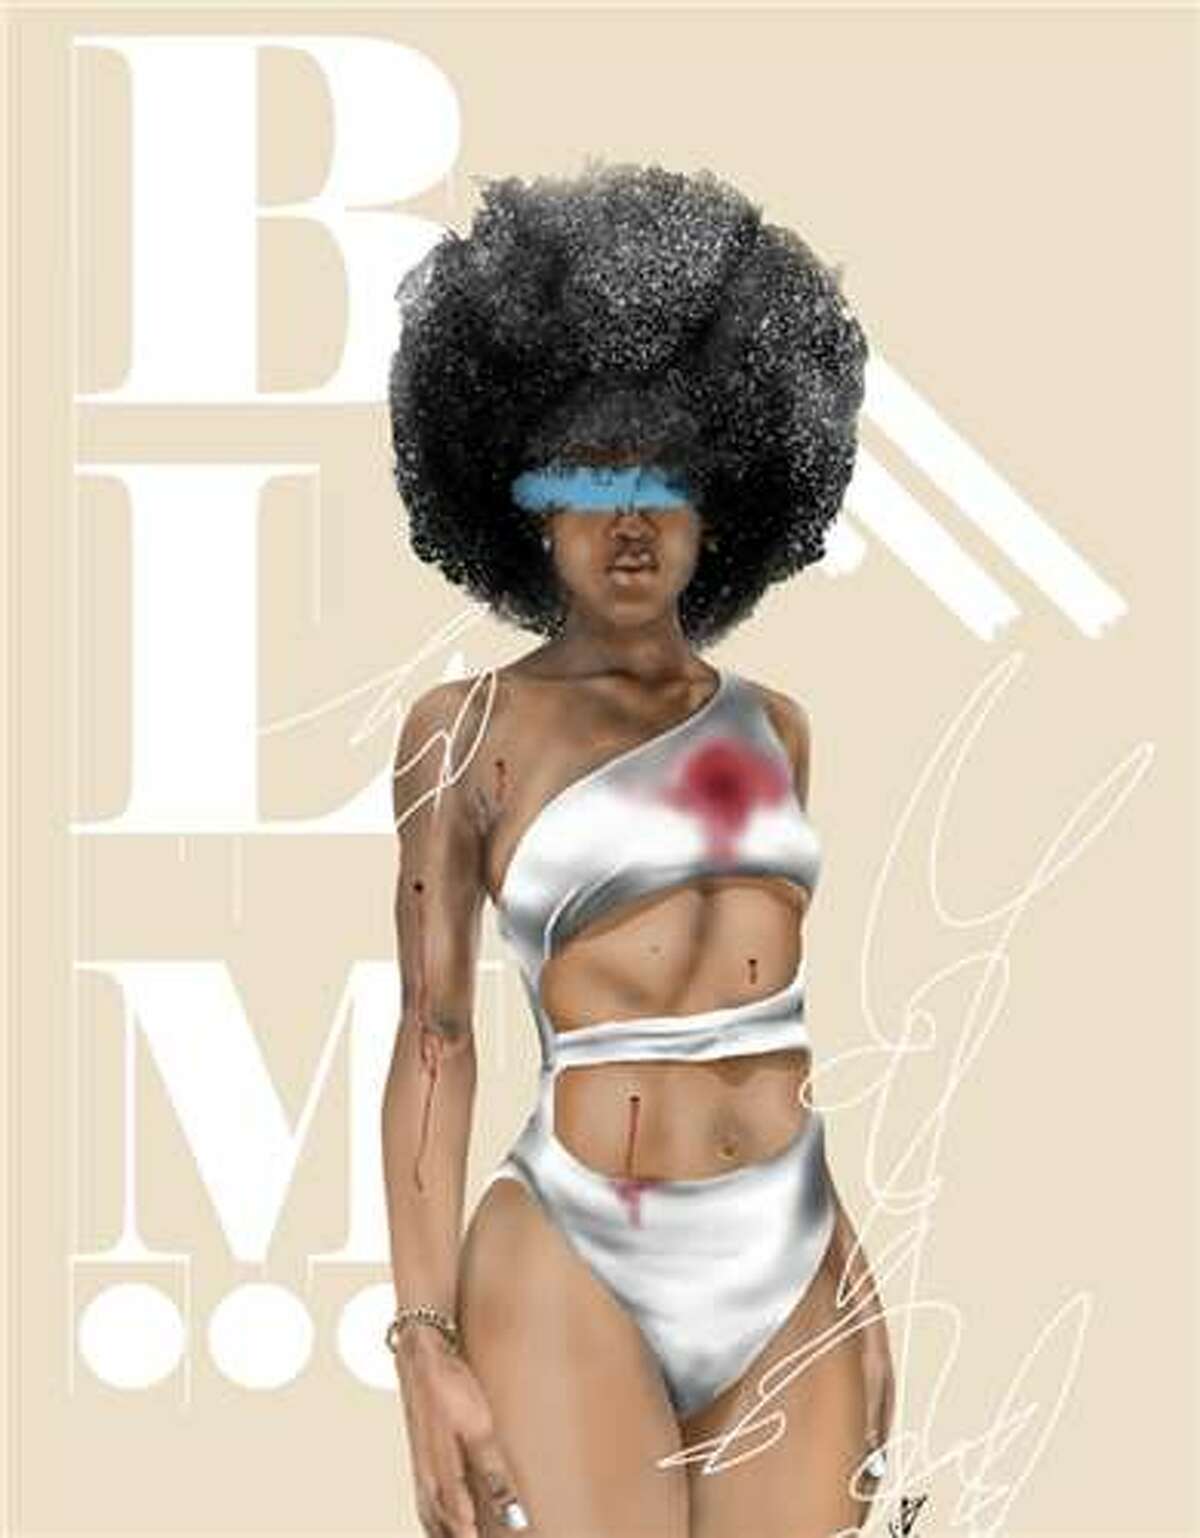 'BLM' by Miles Walker This is one of five artworks submitted for the American Vision Awards.